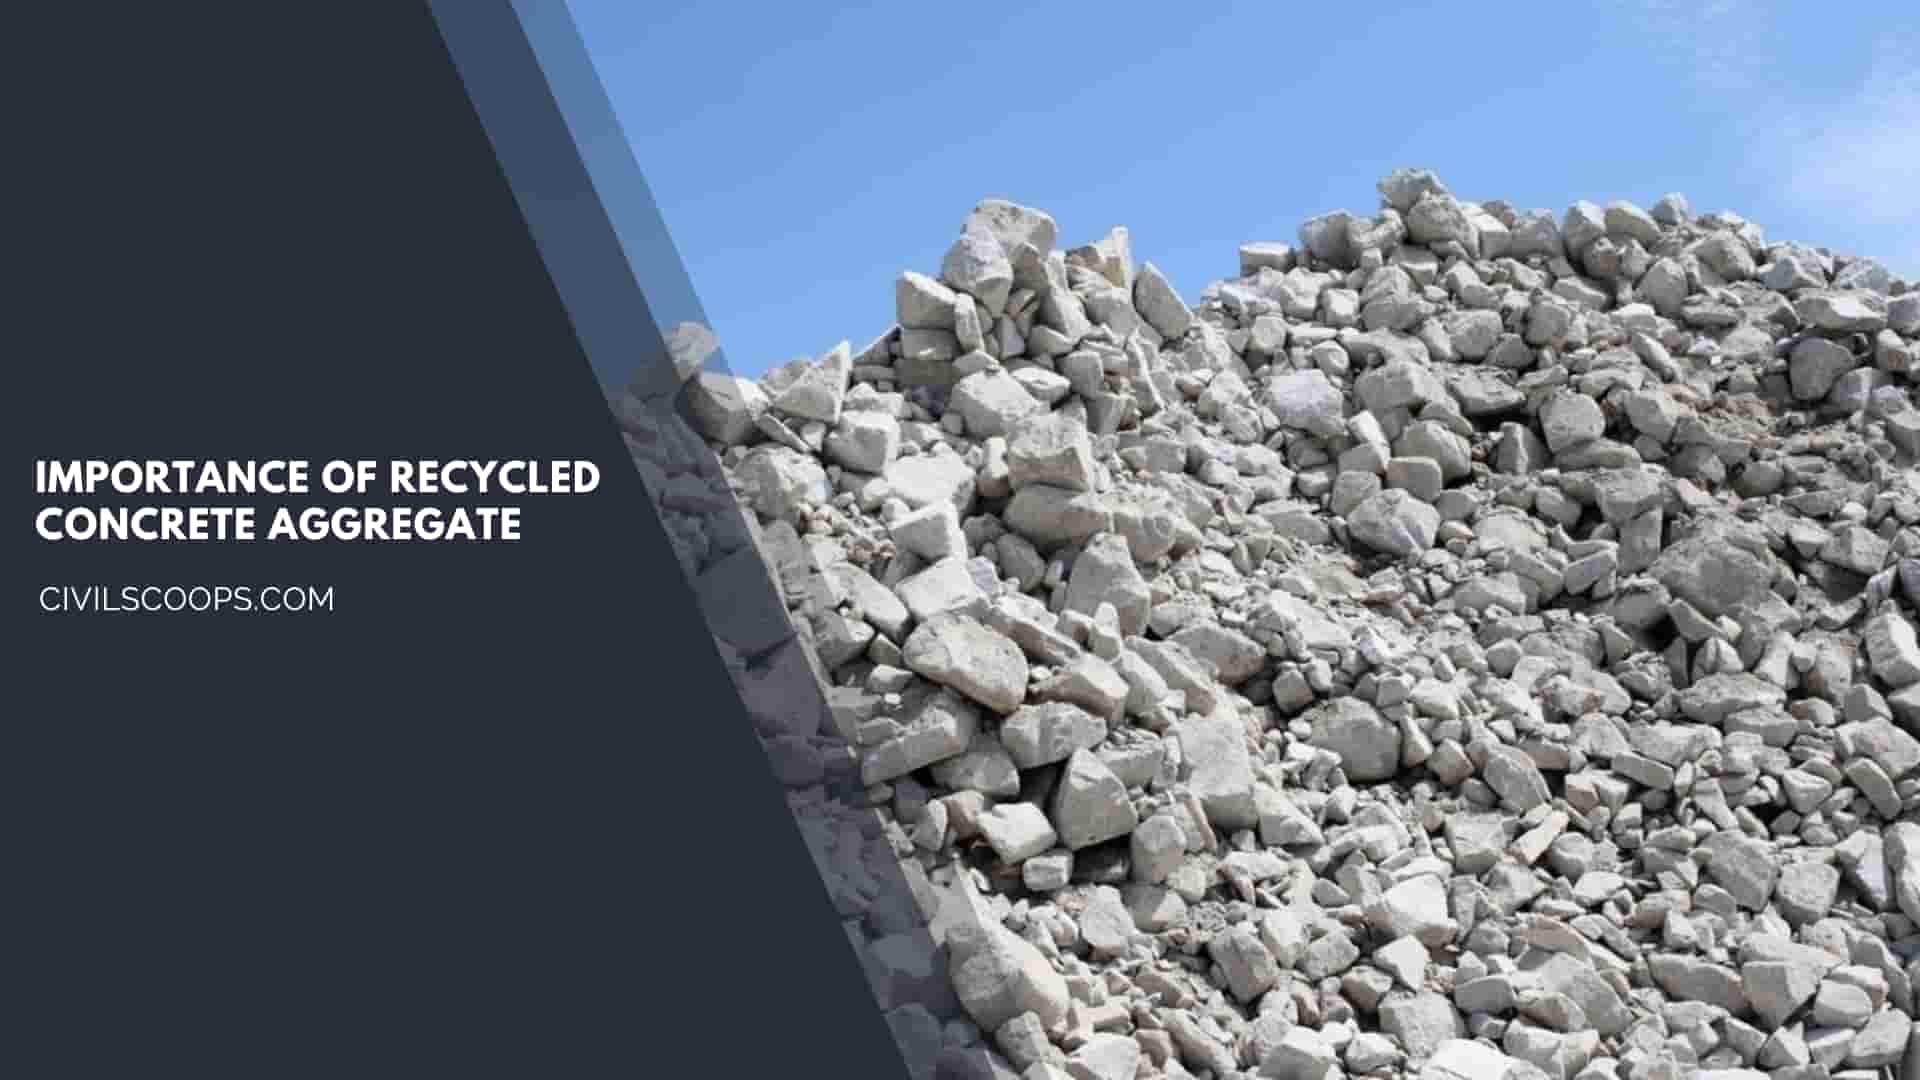 Importance of Recycled Concrete Aggregate